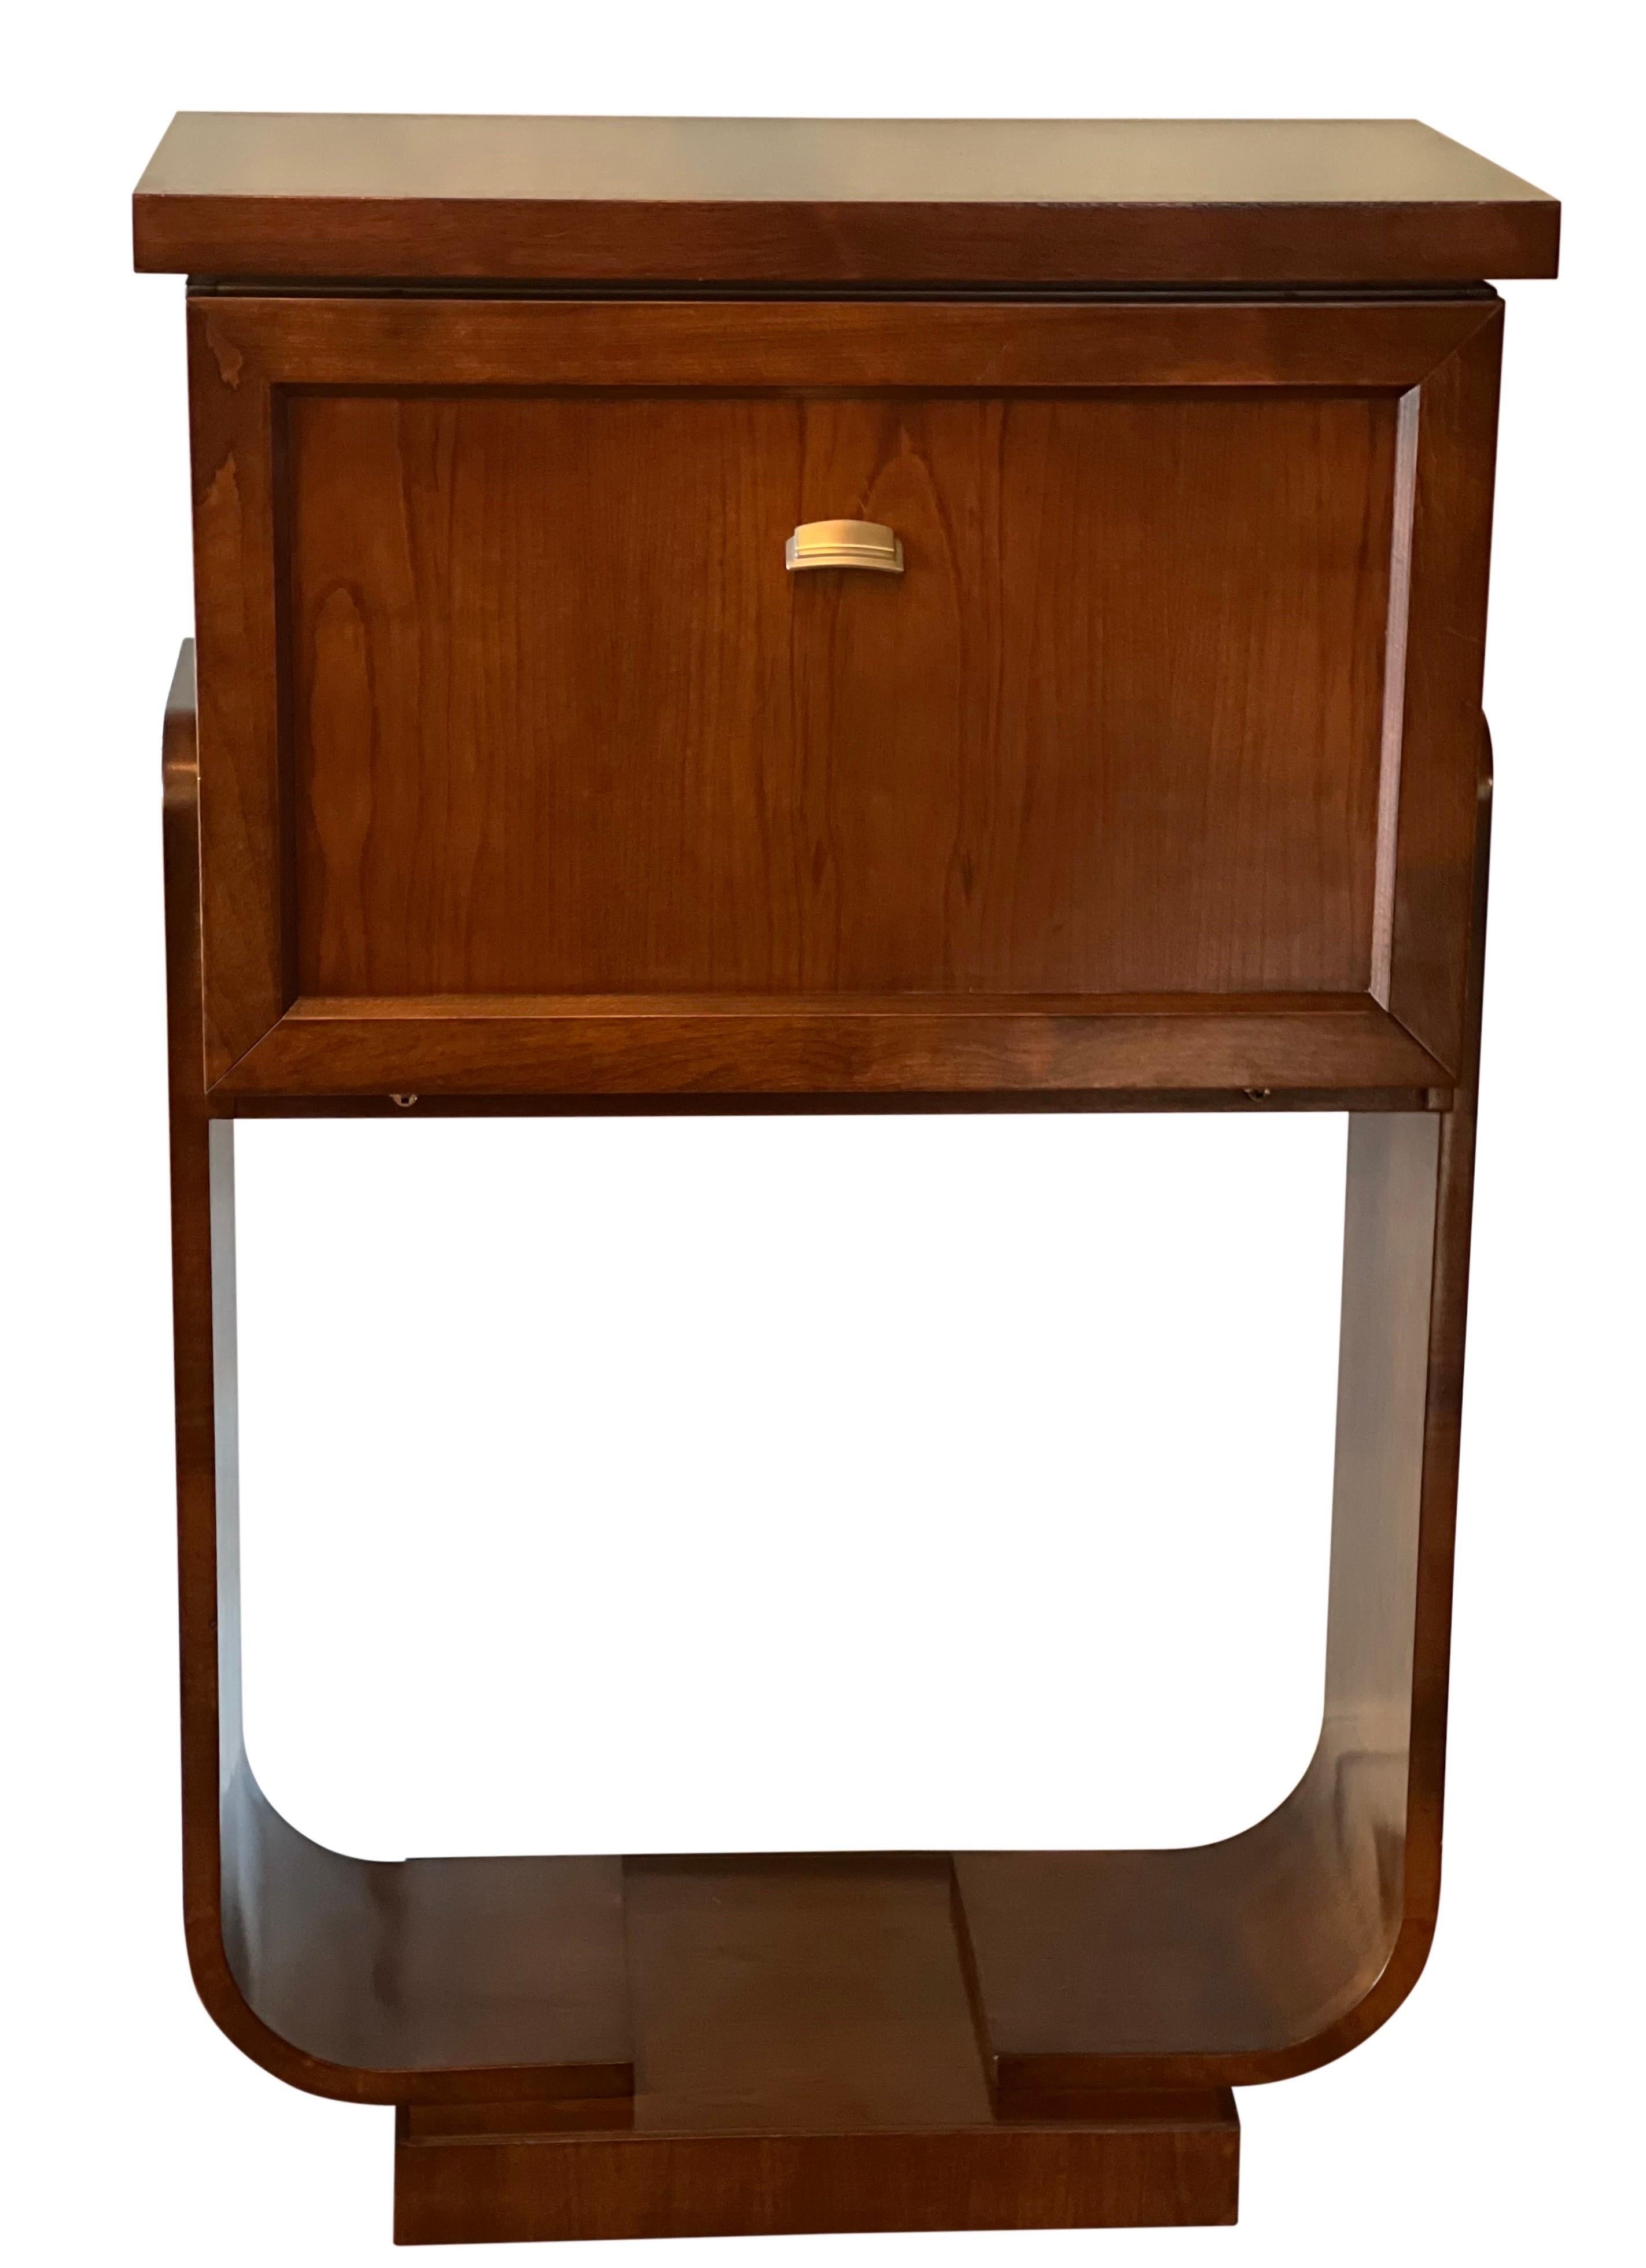 Exquisite Art Deco mahogany bar cabinet with drop front door by SELVA, Italy. 

This is a stunning cabinet expertly handcrafted by one of Italy's premier luxury furniture houses, SELVA, founded in 1968. The door gently pulls down to reveal